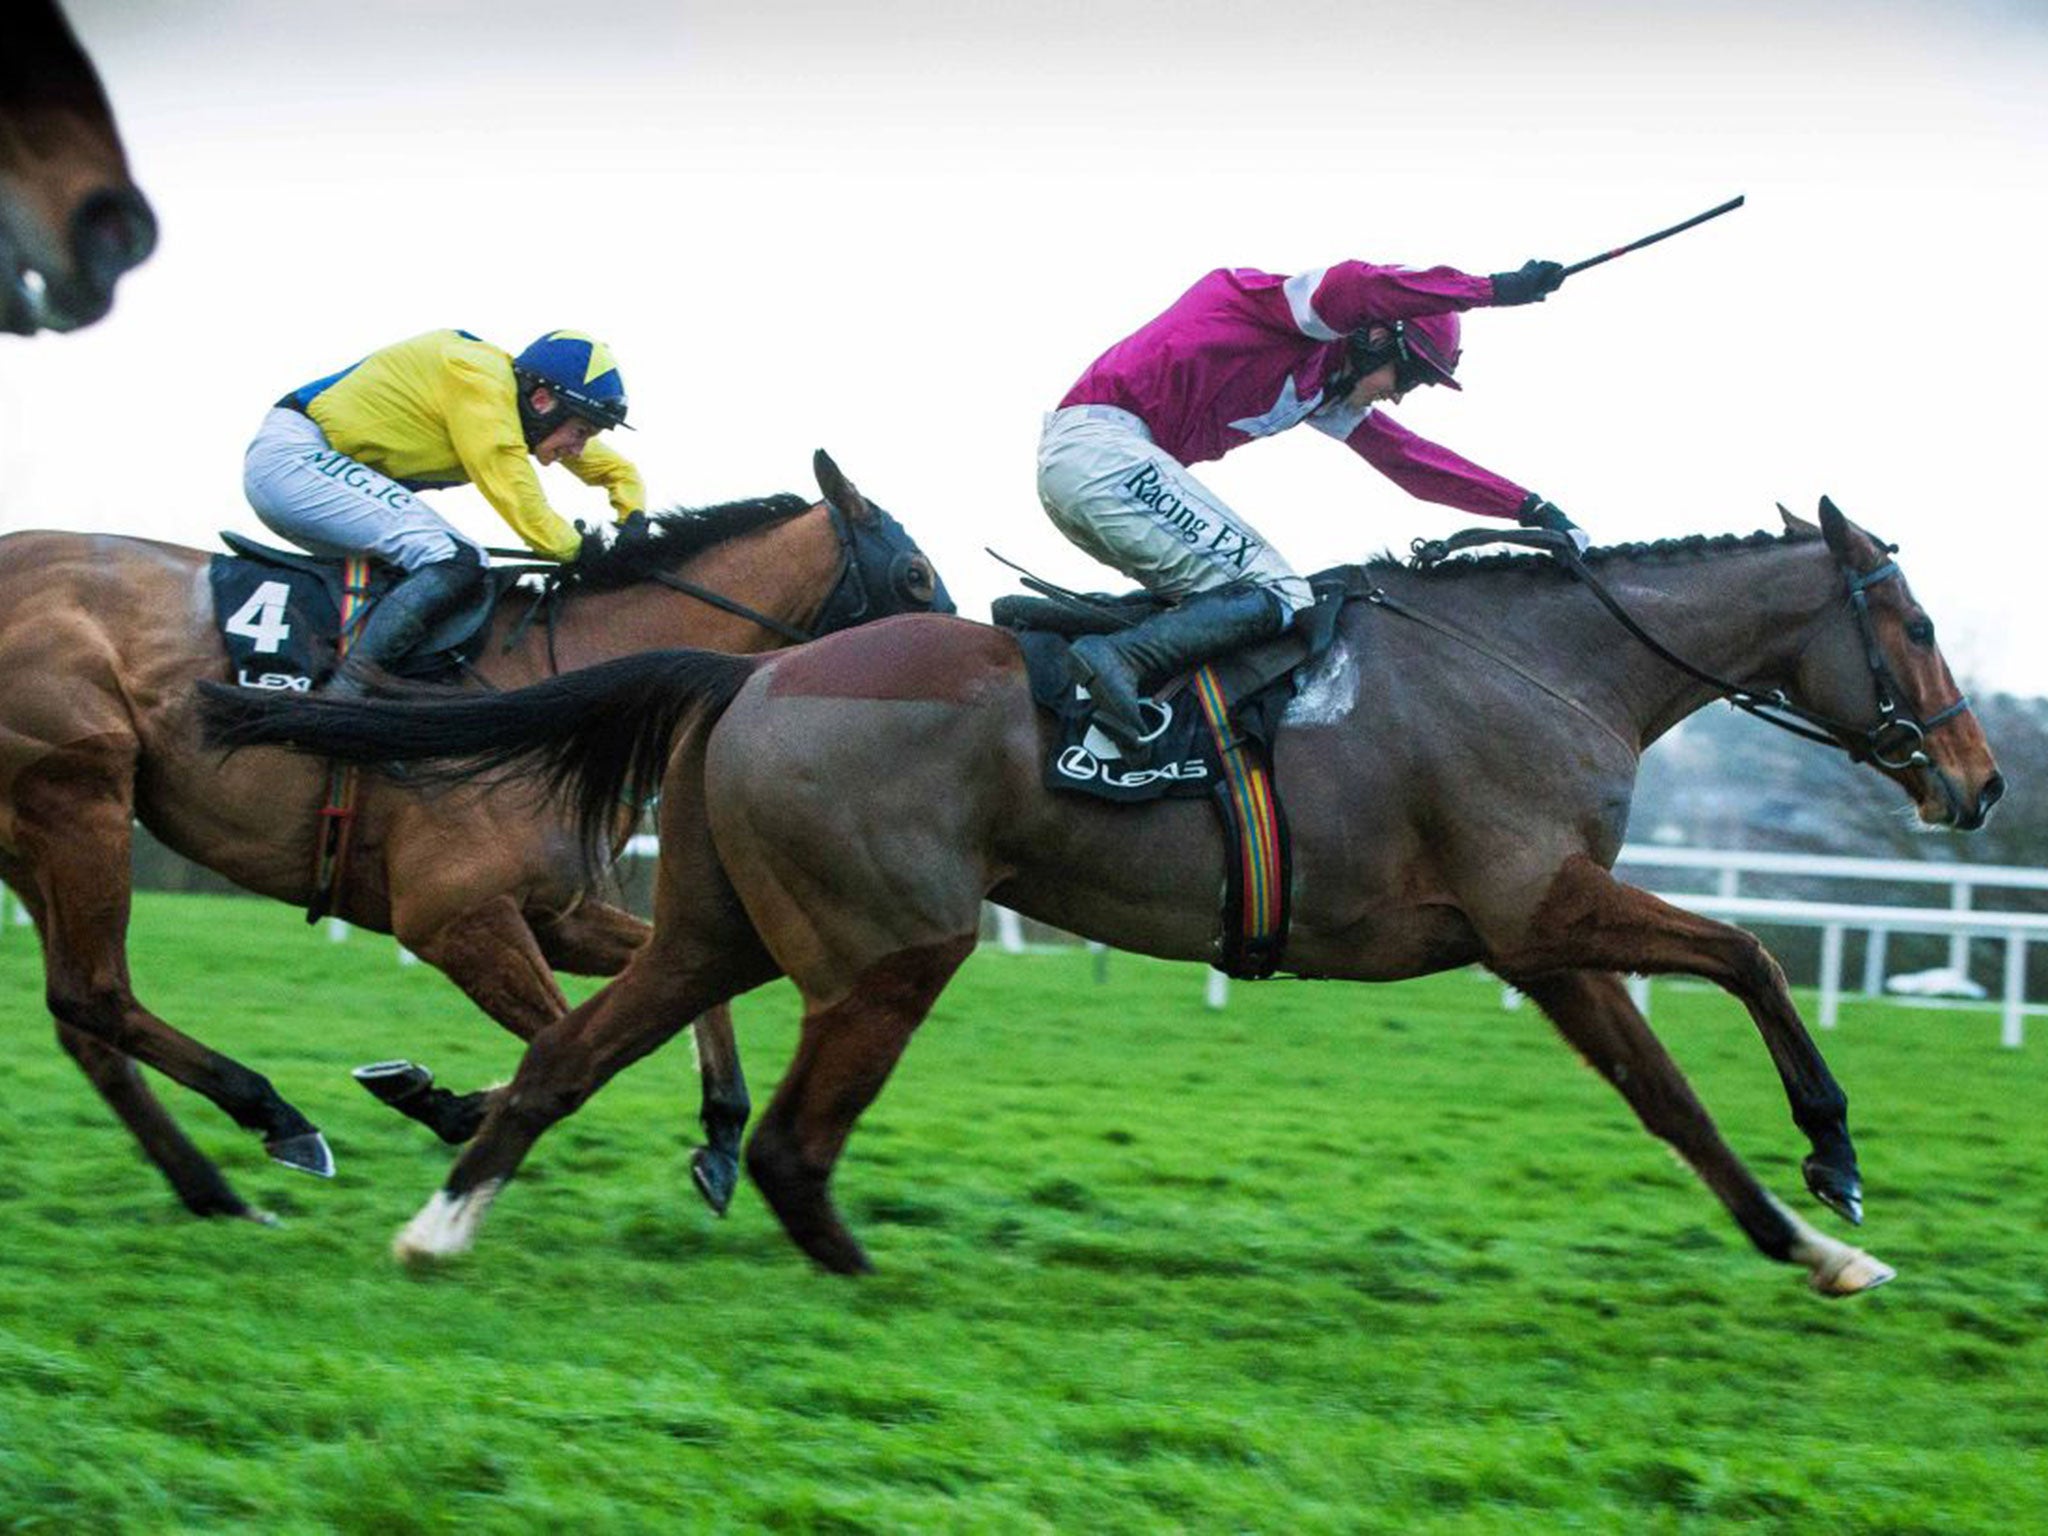 Bryan Cooper urges Don Poli ahead of the eventual third Foxrock to win the Grade One Lexus Chase at Leopardstown